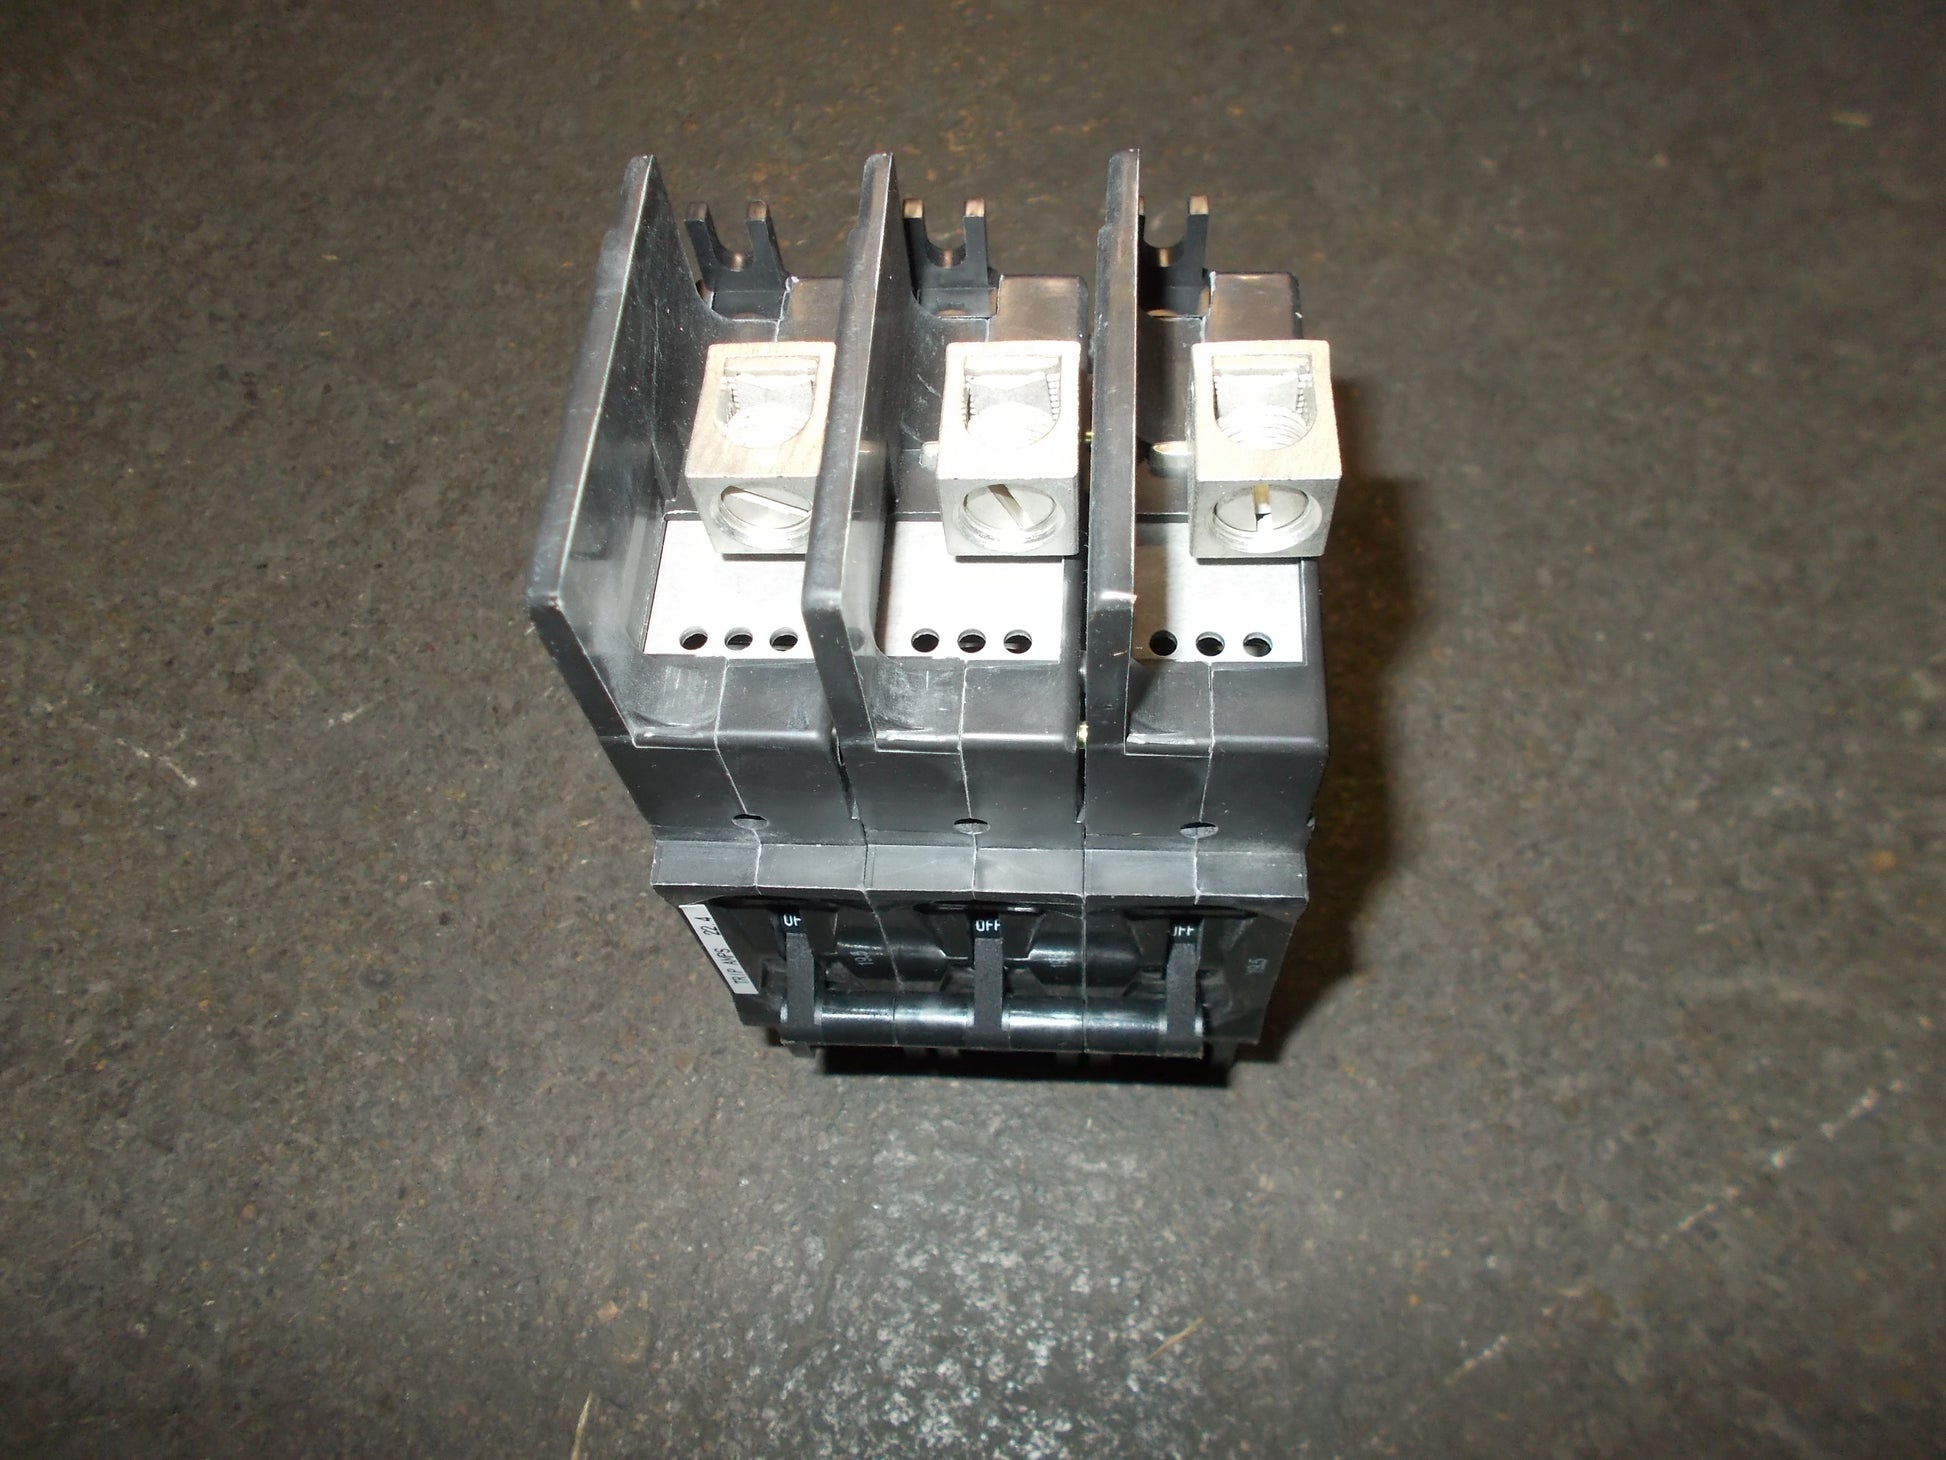 3 POLE 19.5 AMP "219 MULTI-POLE" SERIES HYDRAULIC MAGNETIC CIRCUIT BREAKER PROTECTOR/FOR MANUAL MOTOR CONTROLLER APPLICATIONS 480/50-60/1 OR 3